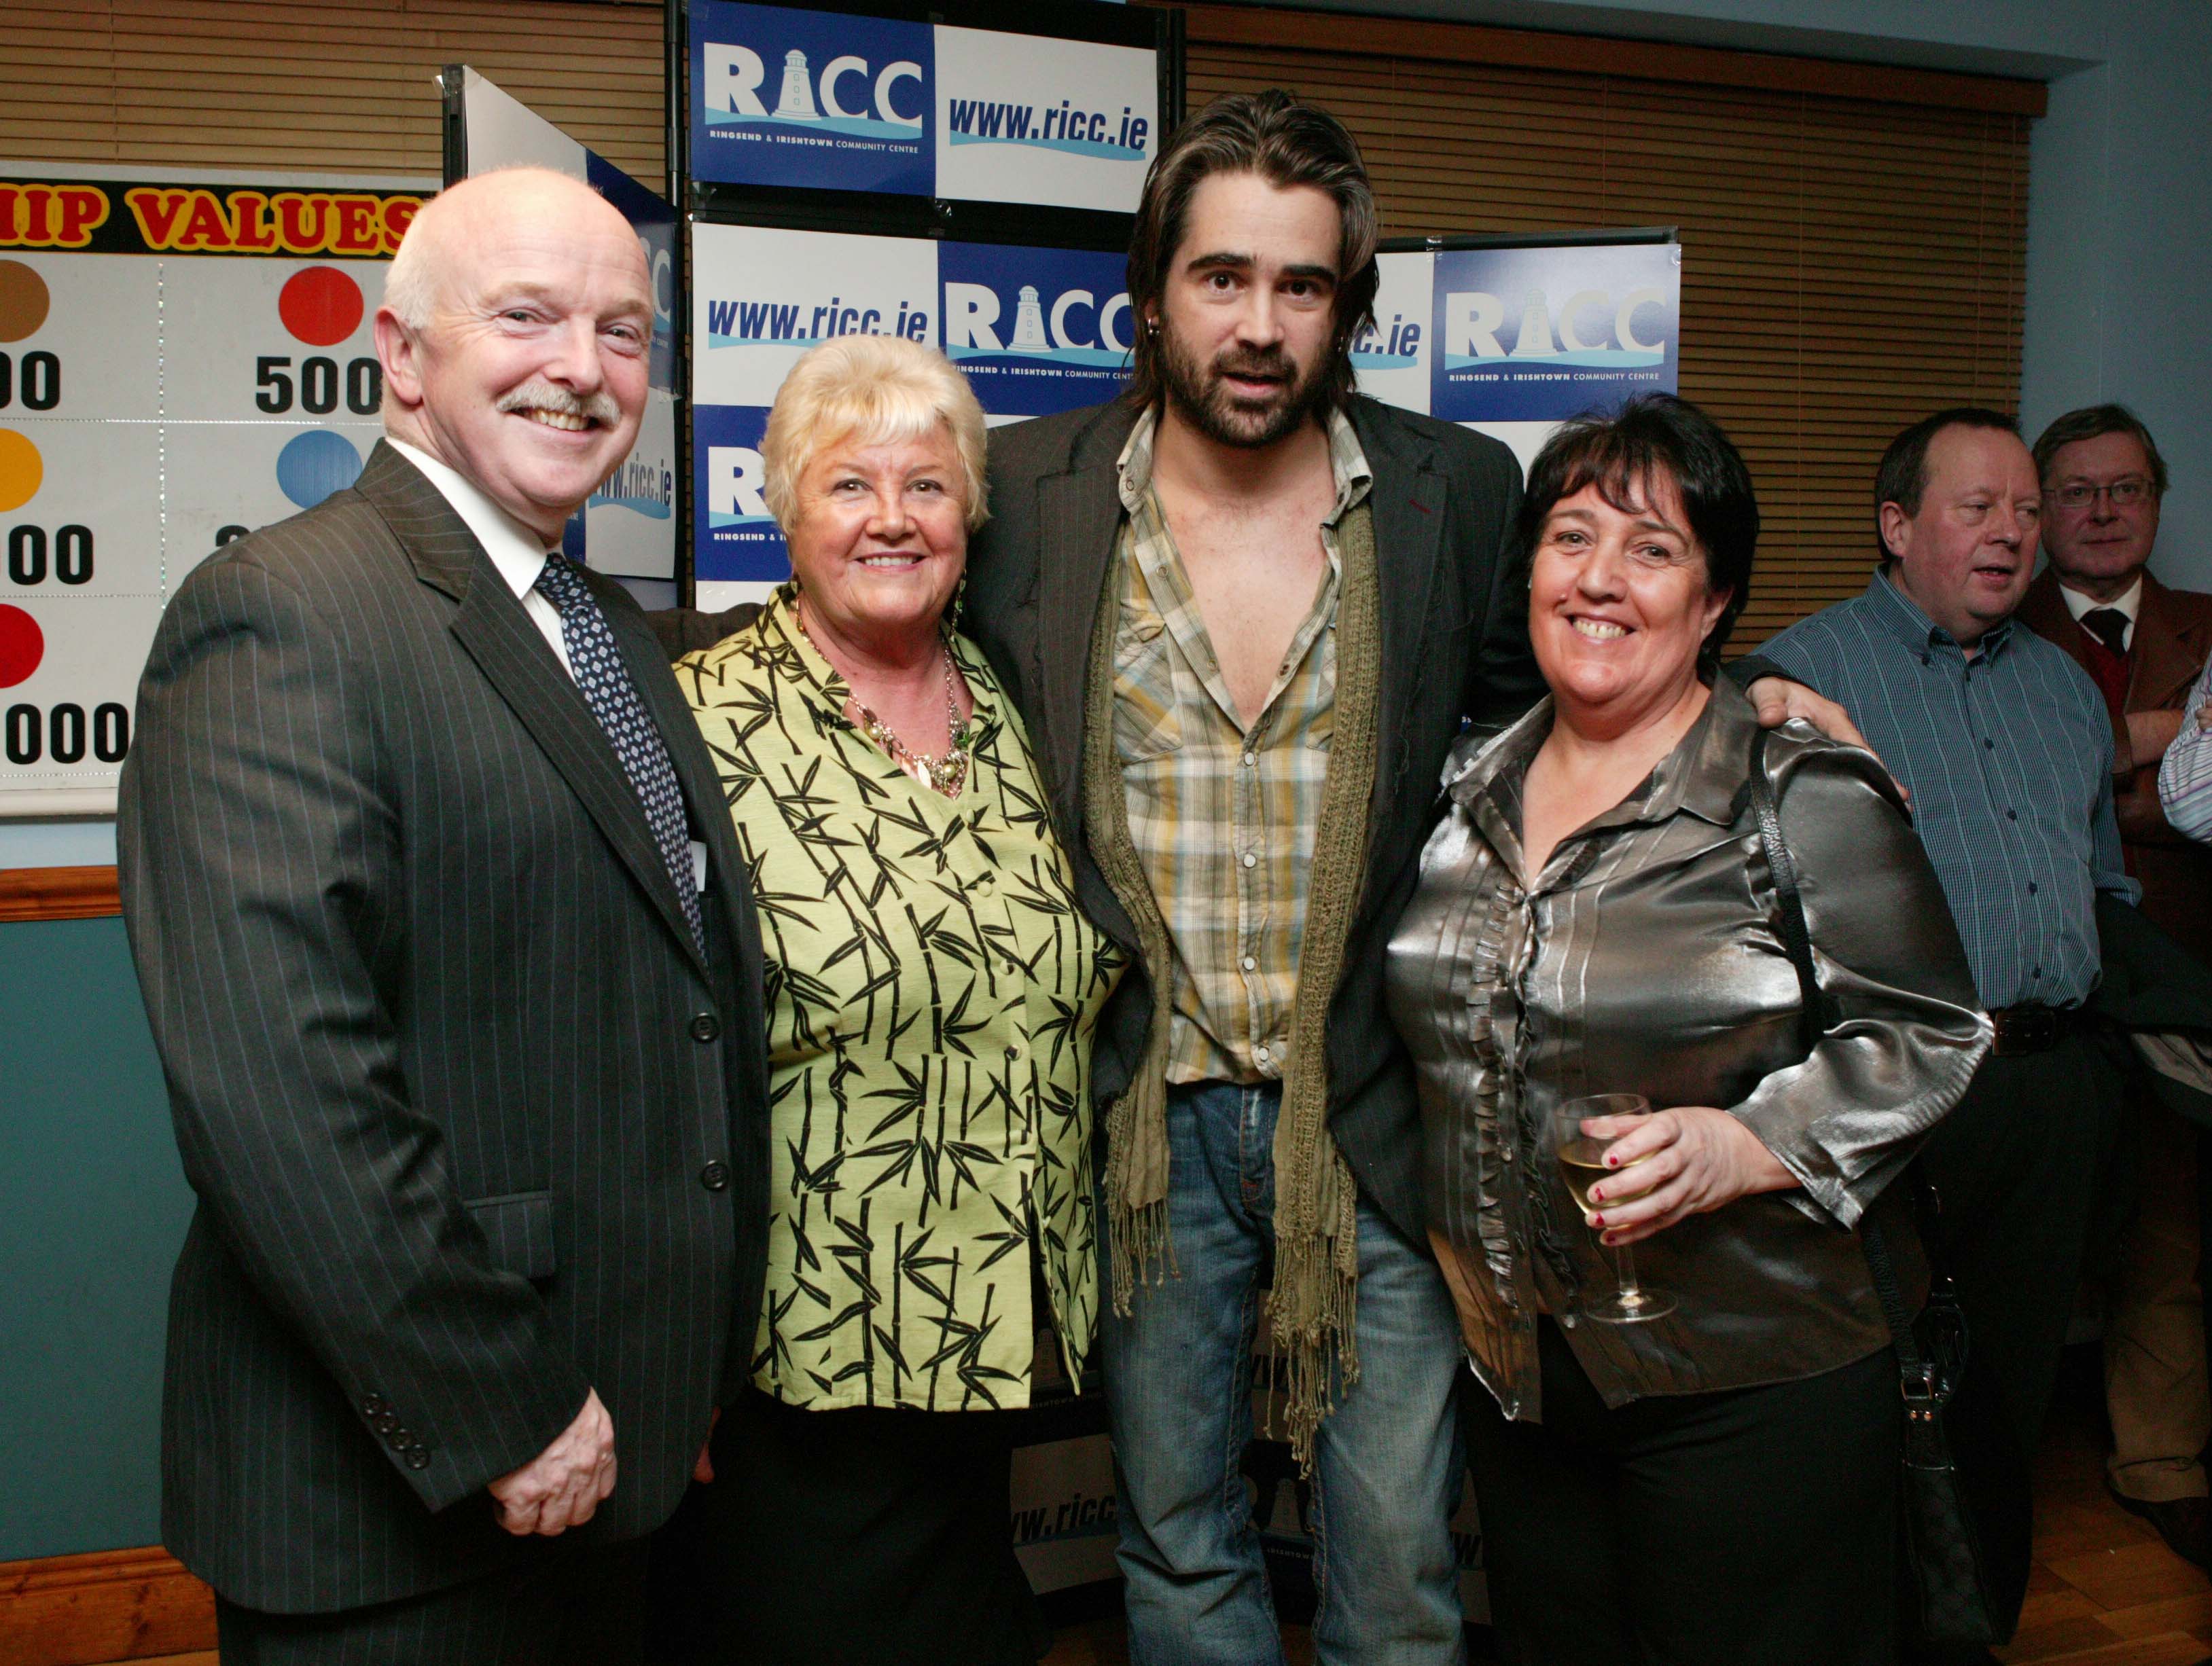 Guests with Colin Farrell - Patron